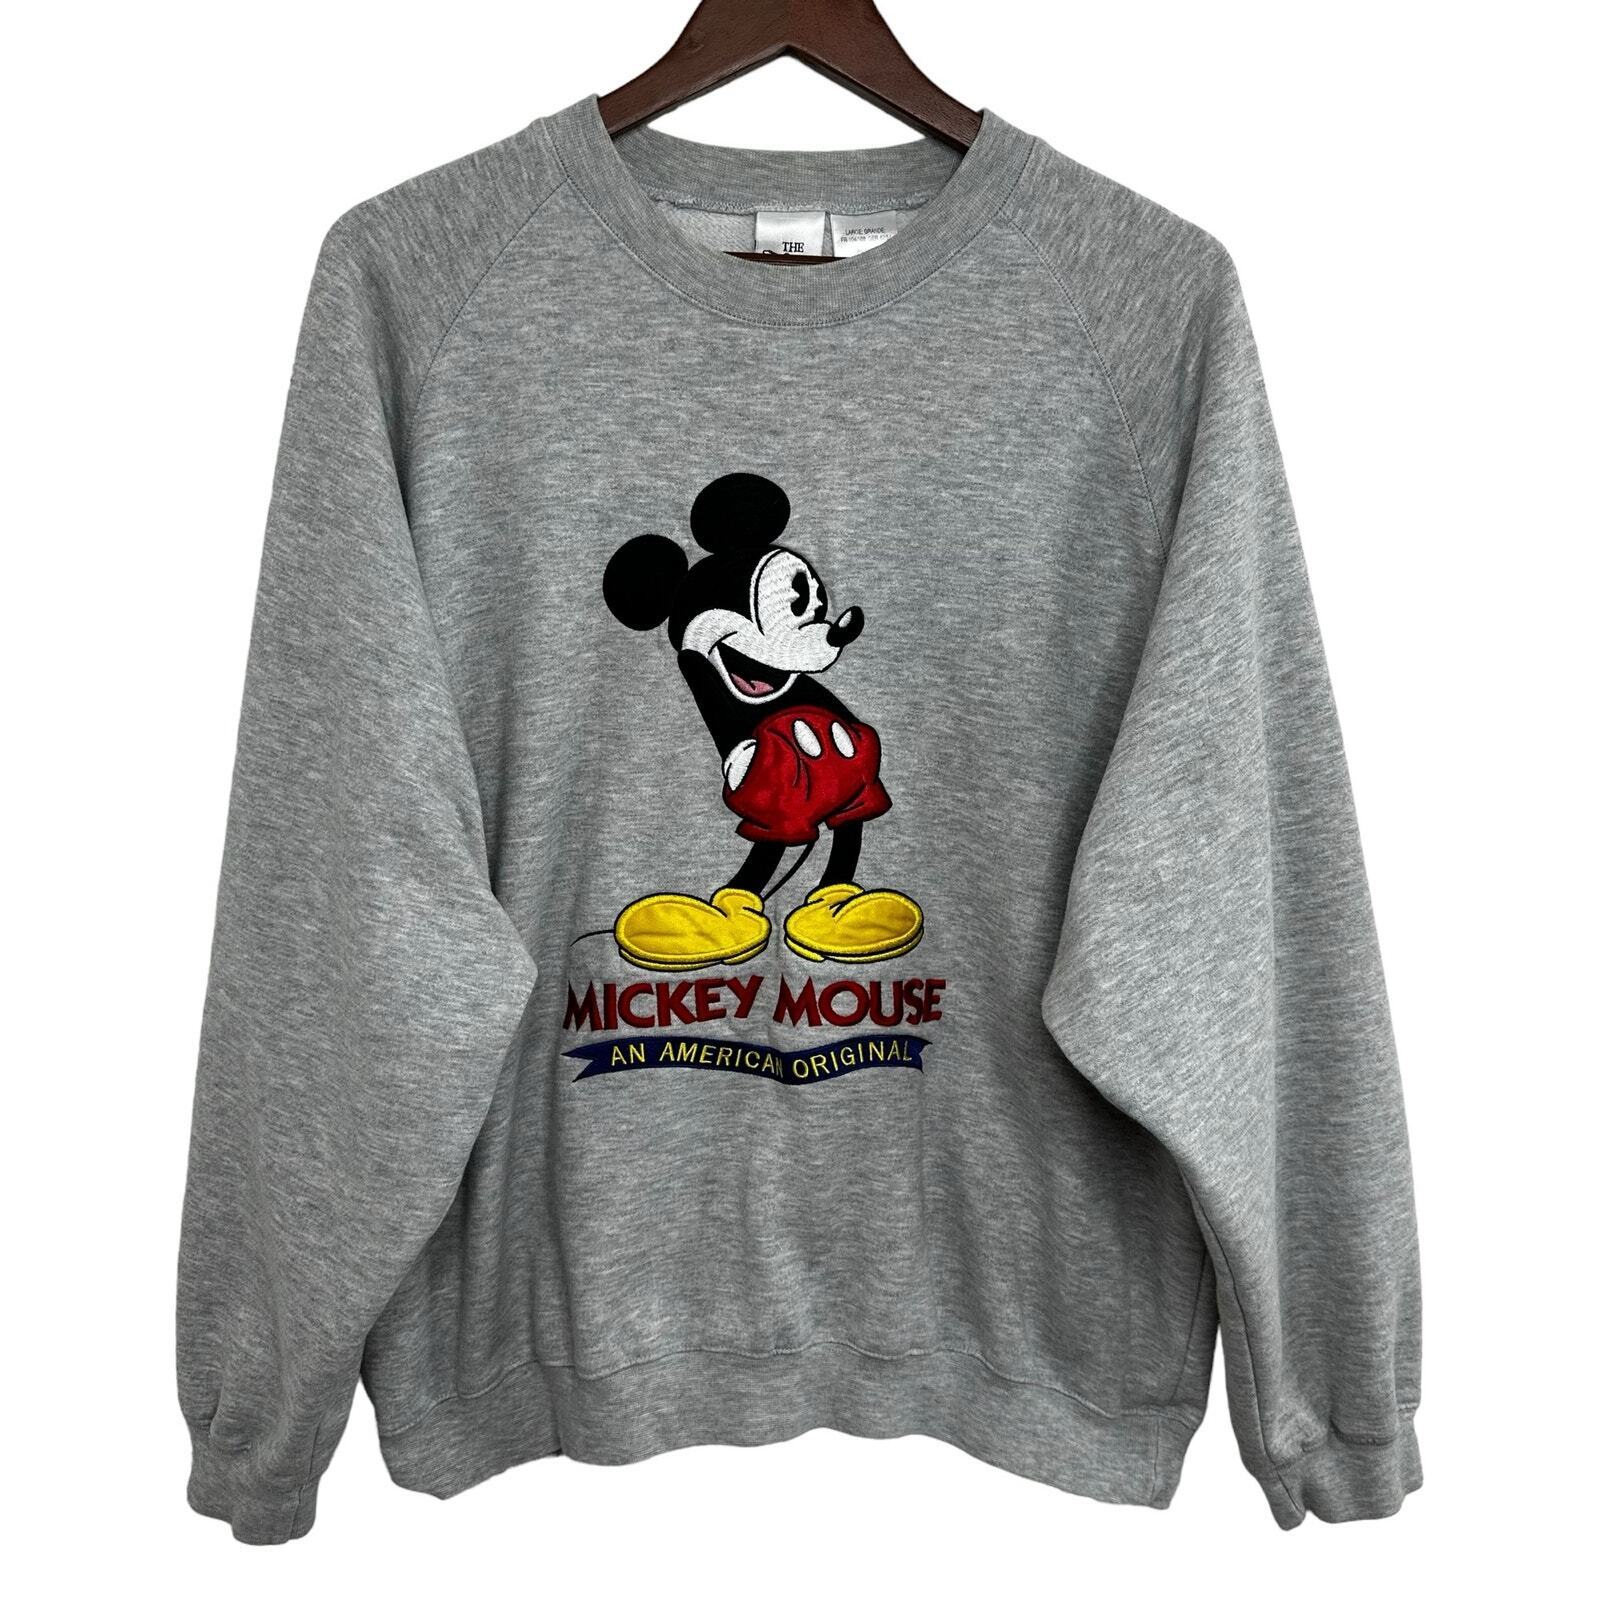 Vintage The Disney Store Mickey Mouse Sweatshirt Size Large Embroidered Unisex